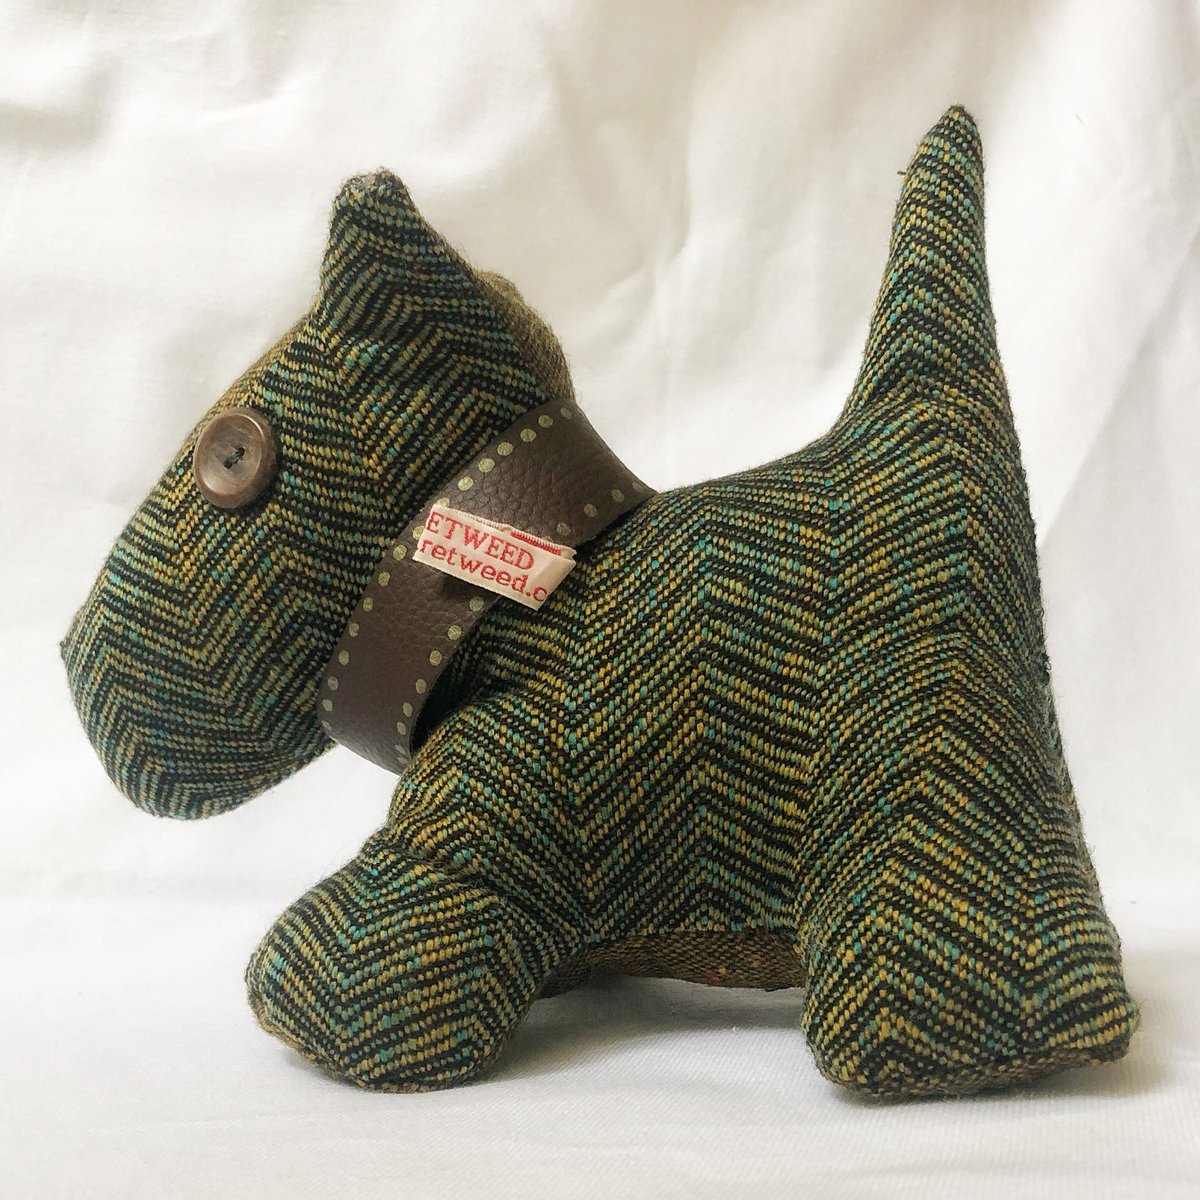 What connects James IV, Humphrey Bogart and Julie Andrews? All devoted owners of the self-assured, independent & playful Scottie Dog.  You too could own your own unique and characterful pup - just check out our website here loom.ly/6Ftc5aU for details. #BuySocial #SocEnt